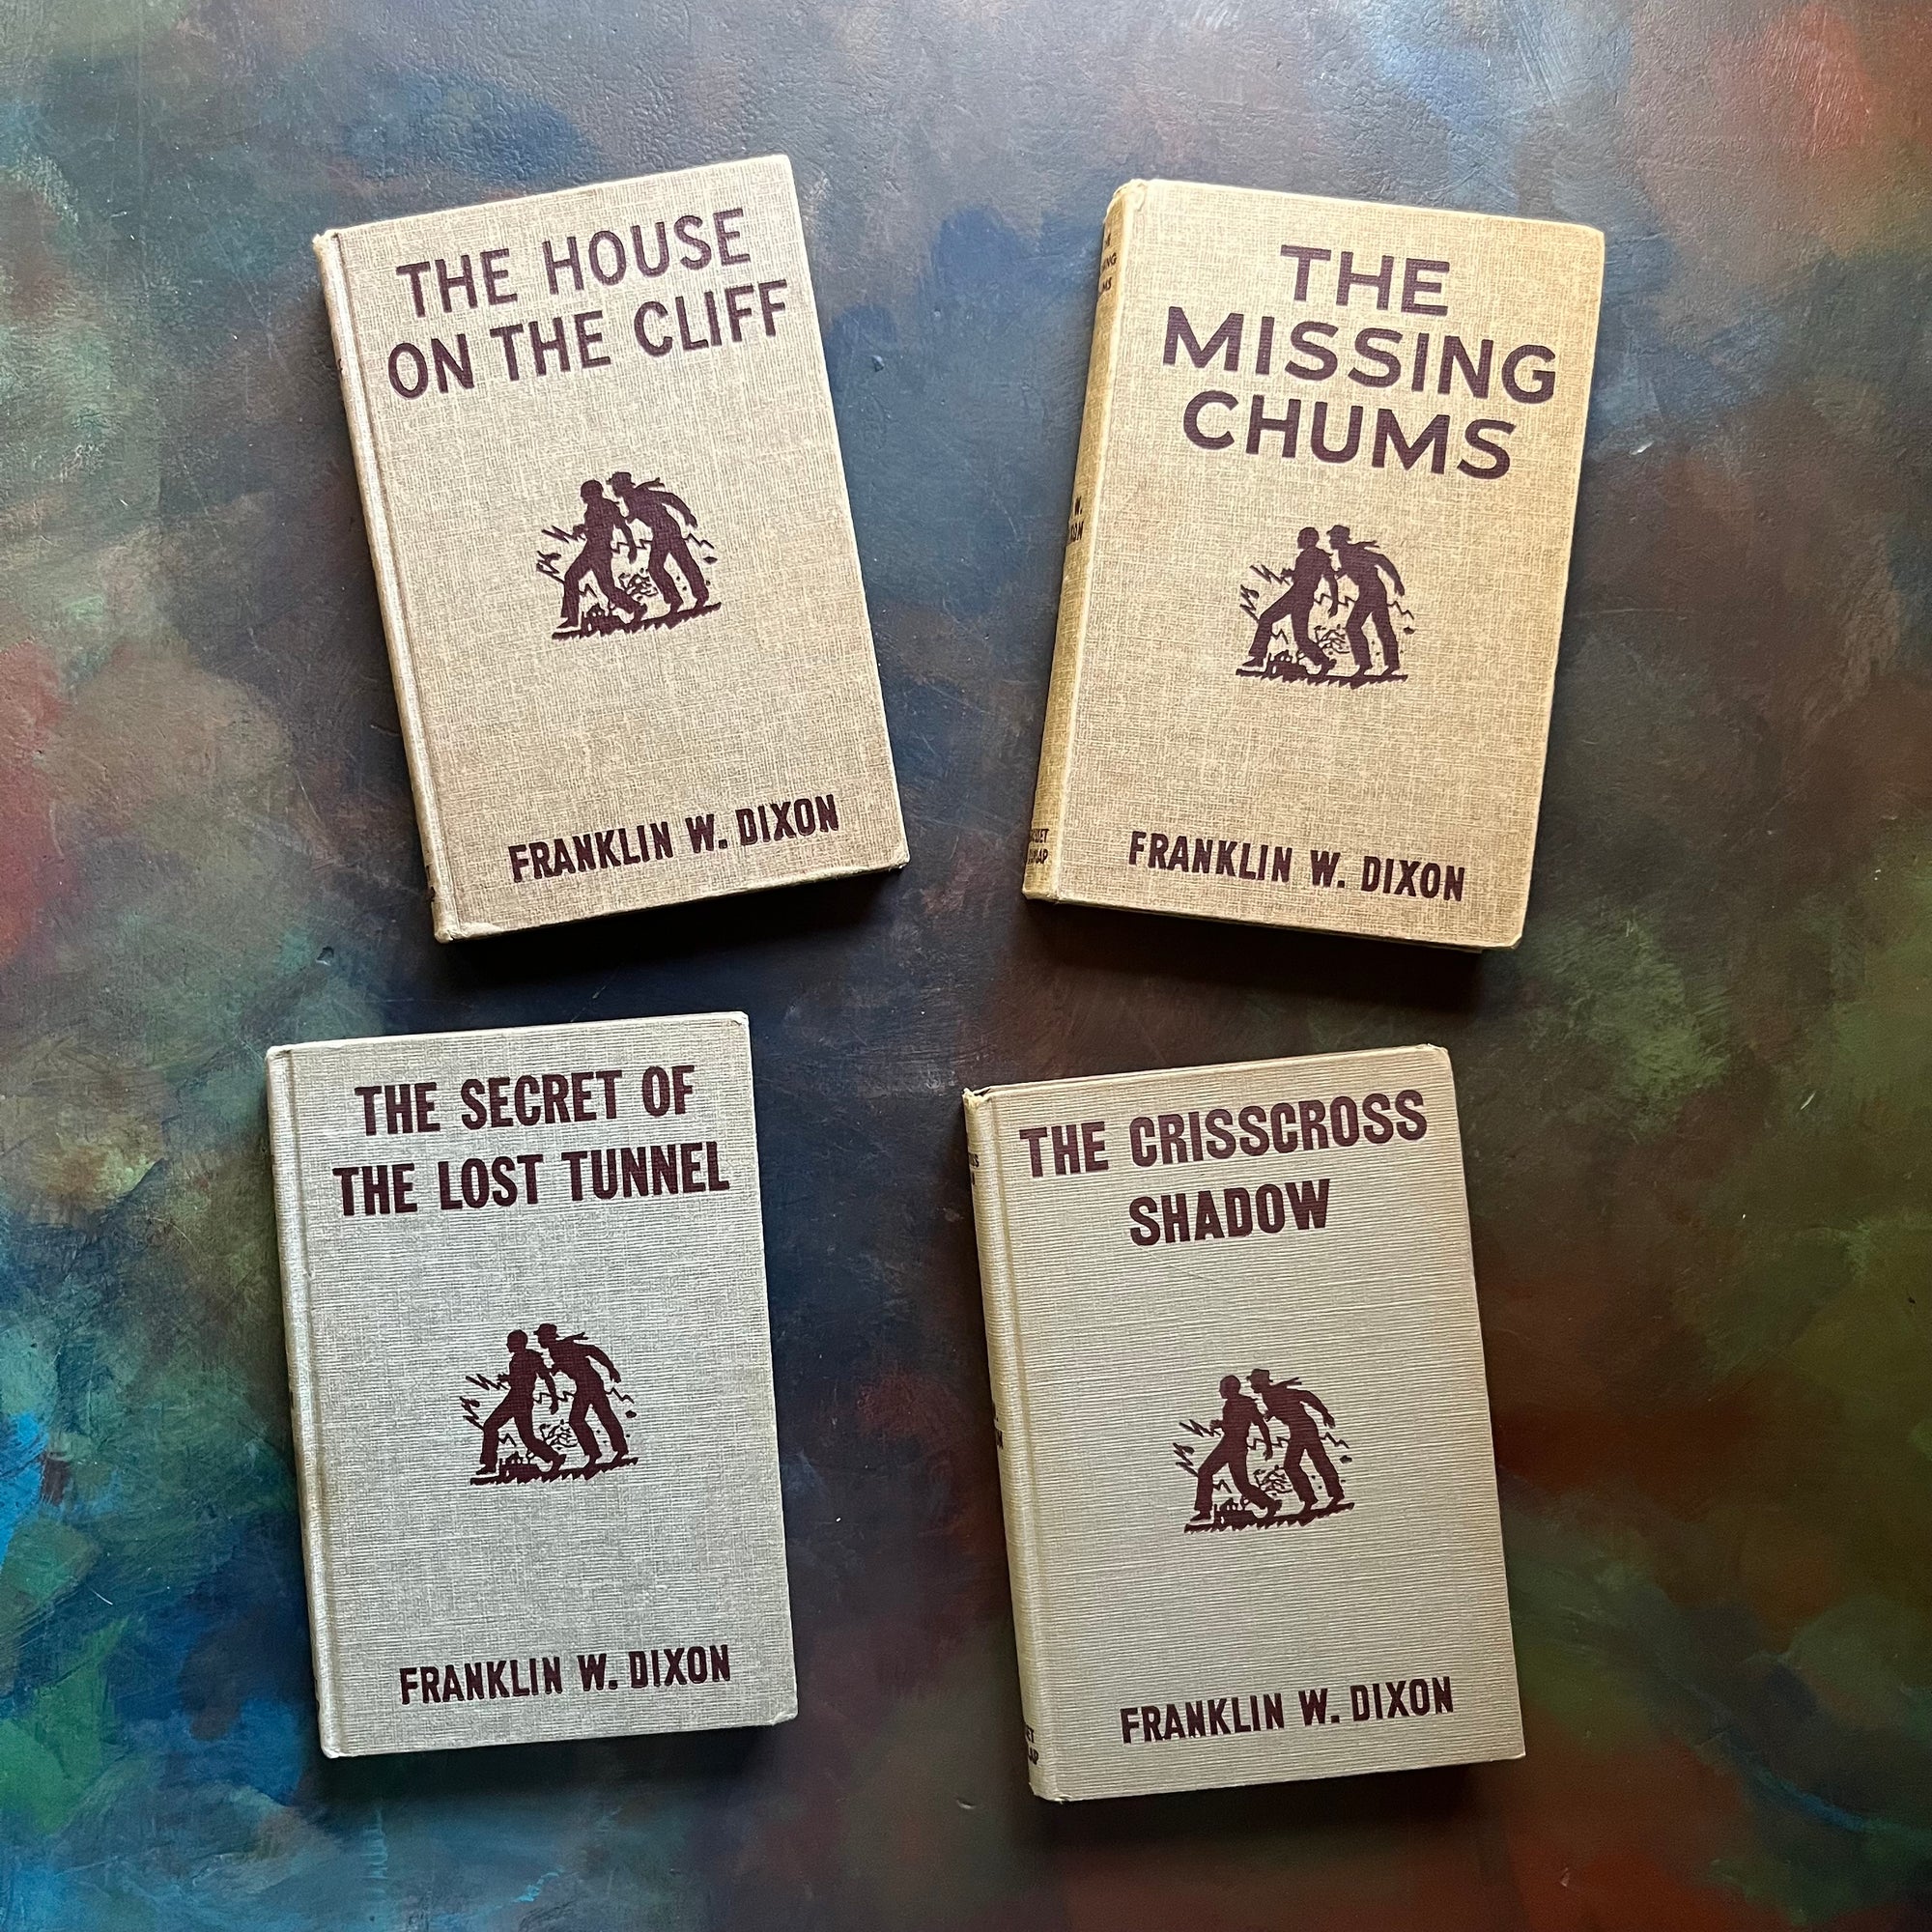 The Hardy Boys Mysteries by Franklin W. Dixon-The House on the Cliff-The Missing Chums-The Crisscross Shadow-The Secret of the Lost Tunnel-children's chapter books-view of the front covers in the older brown tweed design